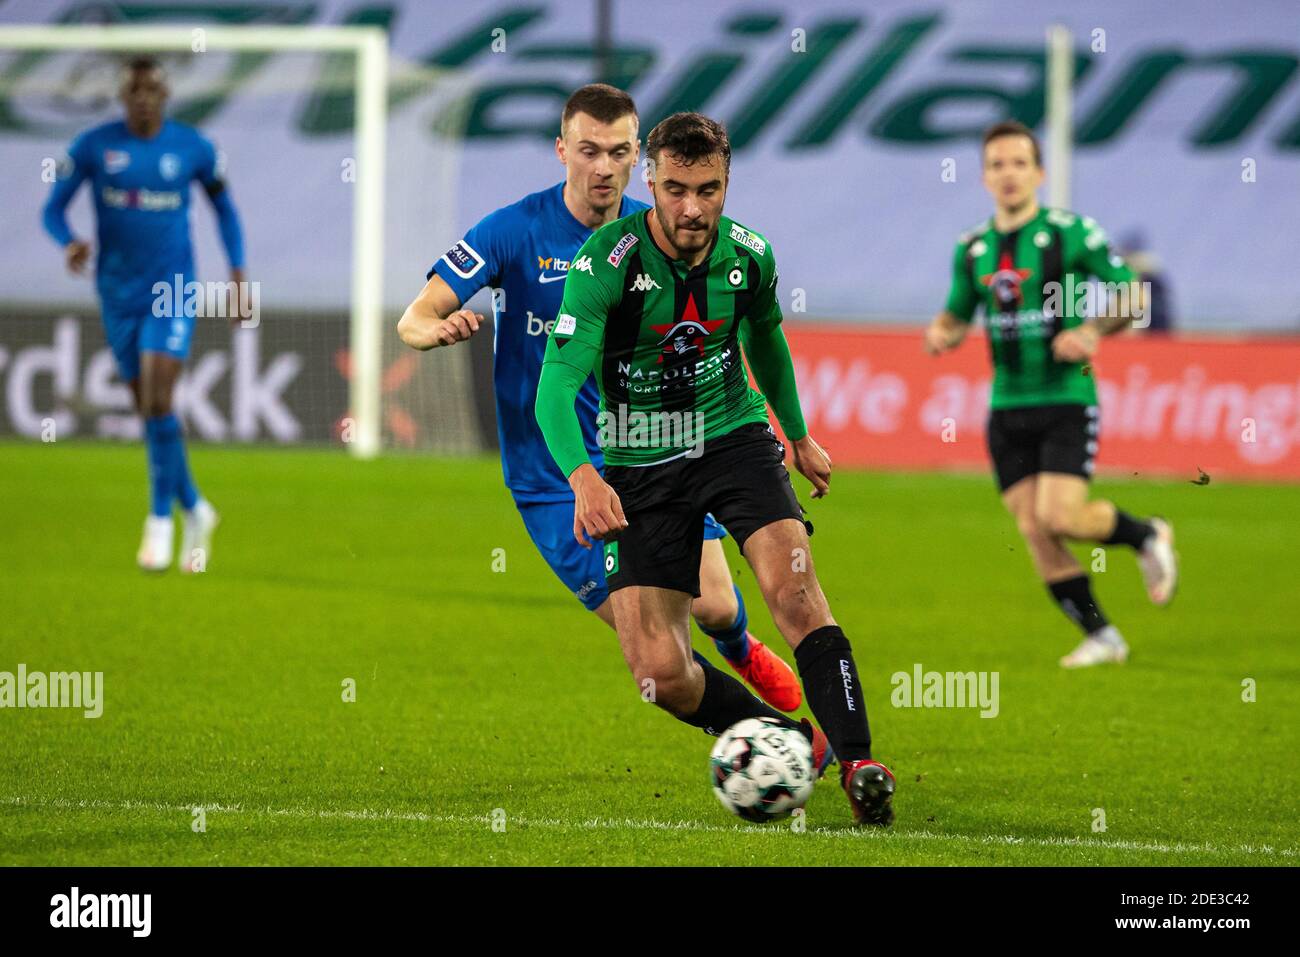 Genk's Bryan Heynen and Cercle's Charles Vanhoutte fight for the ball during a postponed soccer match between Cercle Brugge KSV and KRC Genk, Saturday Stock Photo